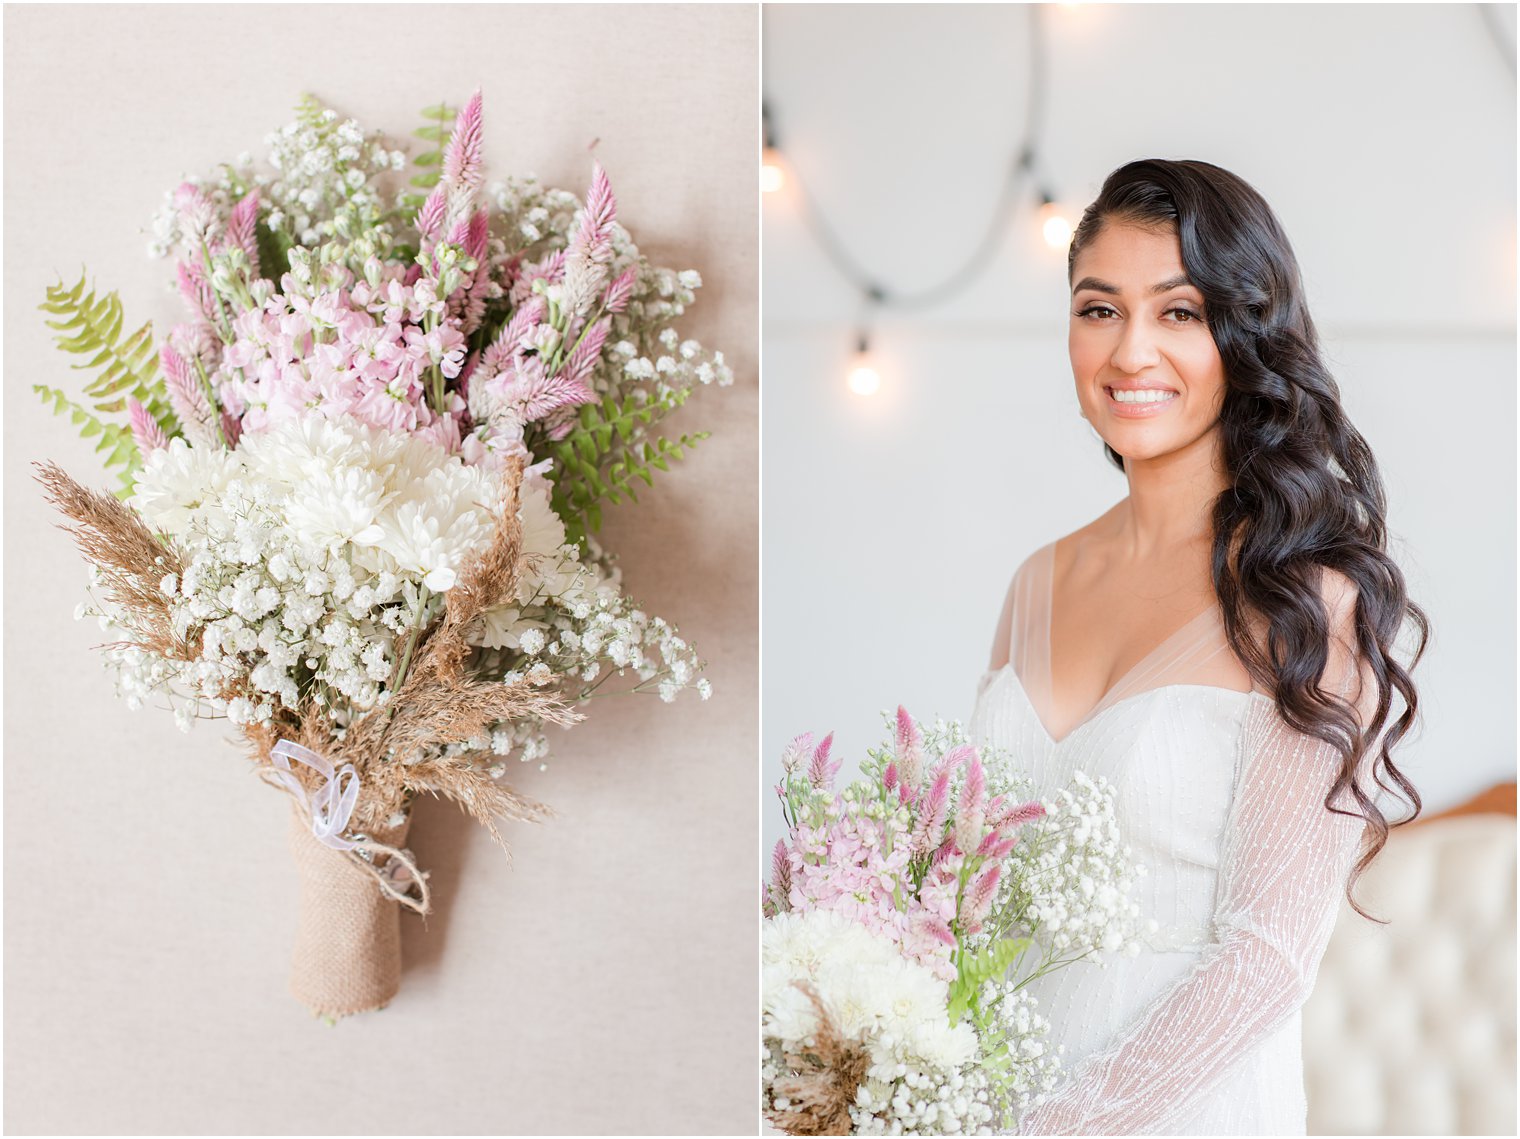 Bridal portrait with bouquet made of wildflowers